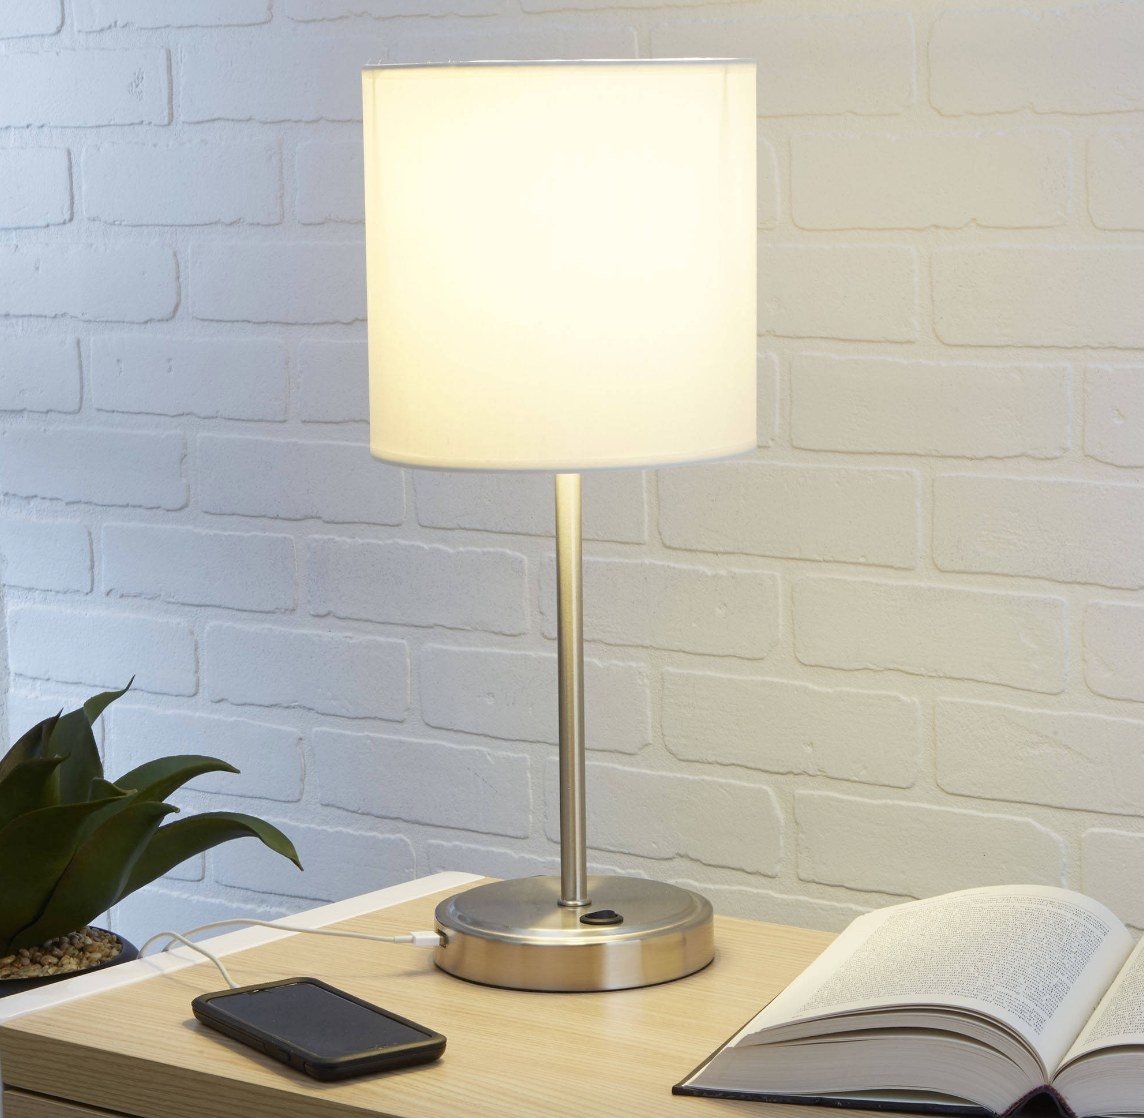 The lamp with a USB port in silver